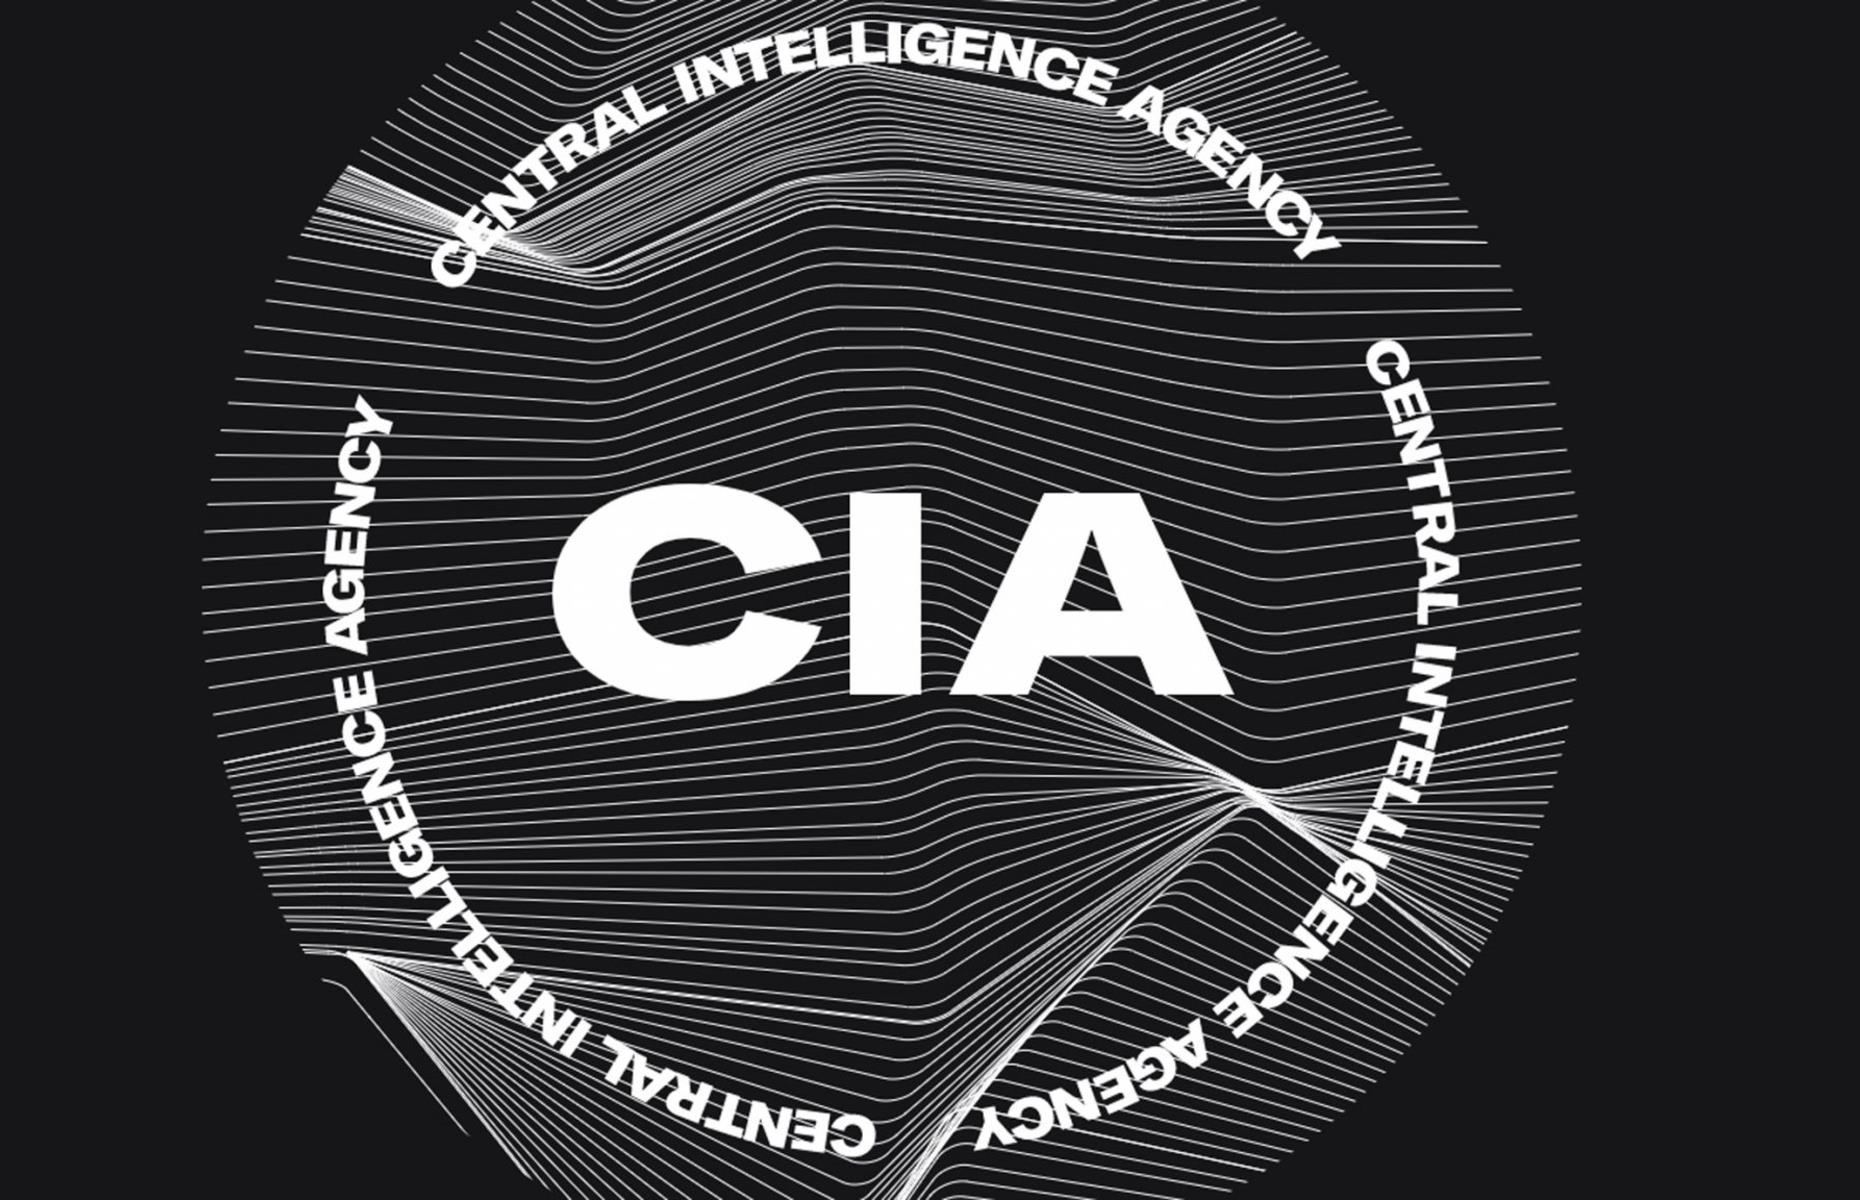 Worst: CIA – after 